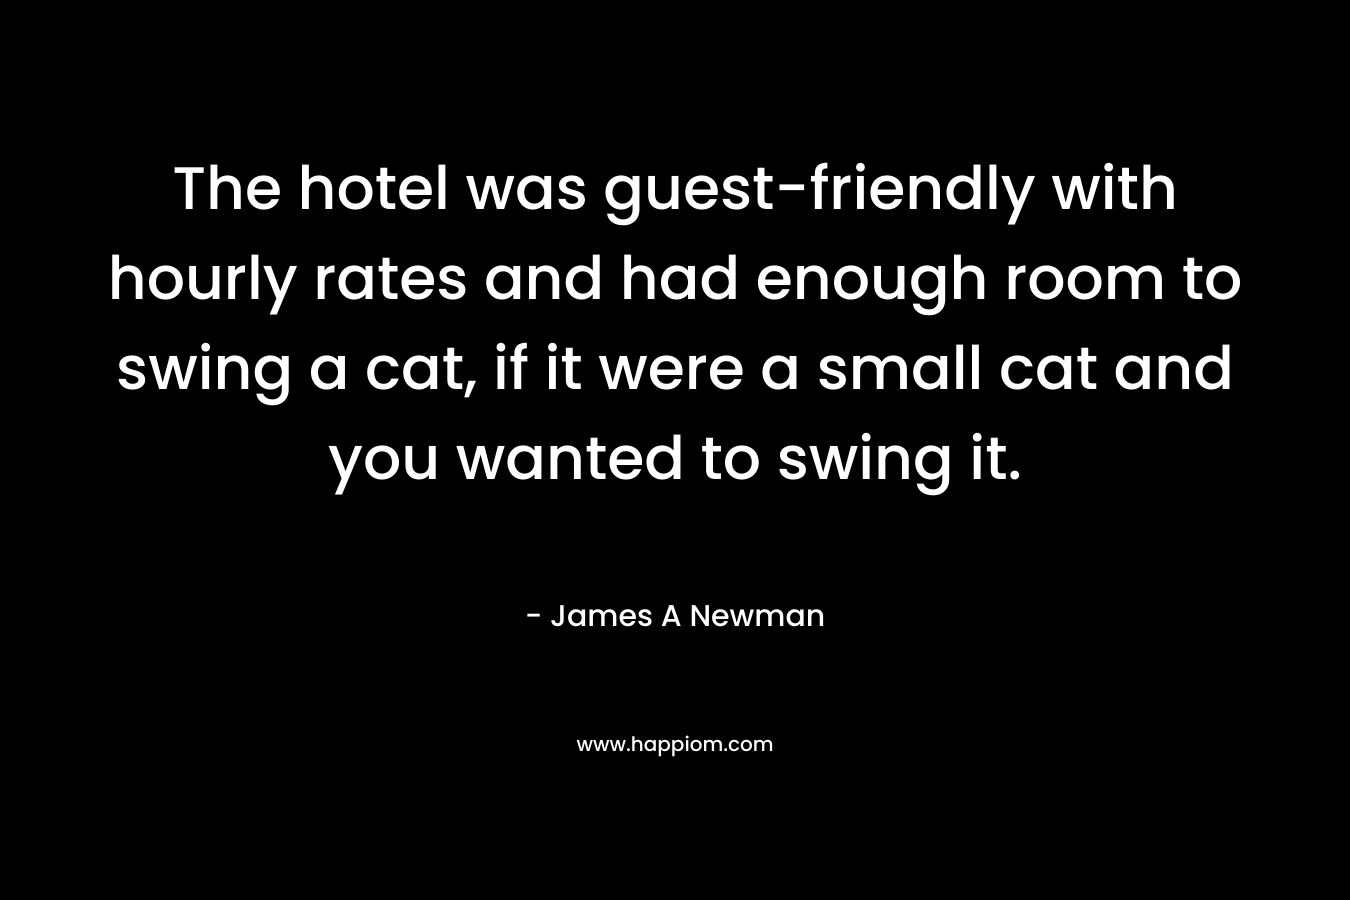 The hotel was guest-friendly with hourly rates and had enough room to swing a cat, if it were a small cat and you wanted to swing it. – James A Newman